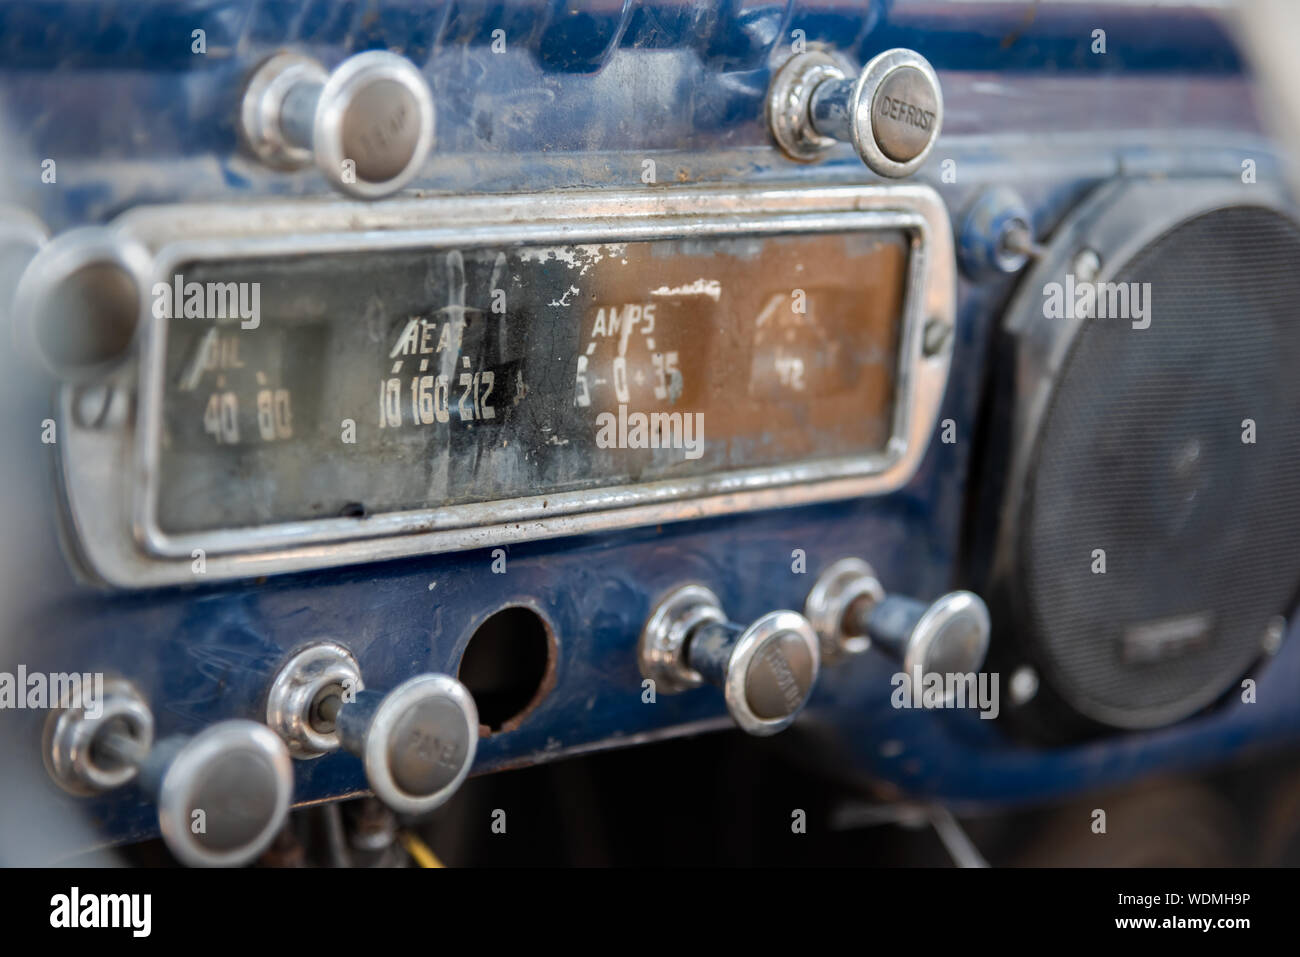 Dashboard at front of abandoned vintage truck with ammeter, oil indicator, various knobs Stock Photo